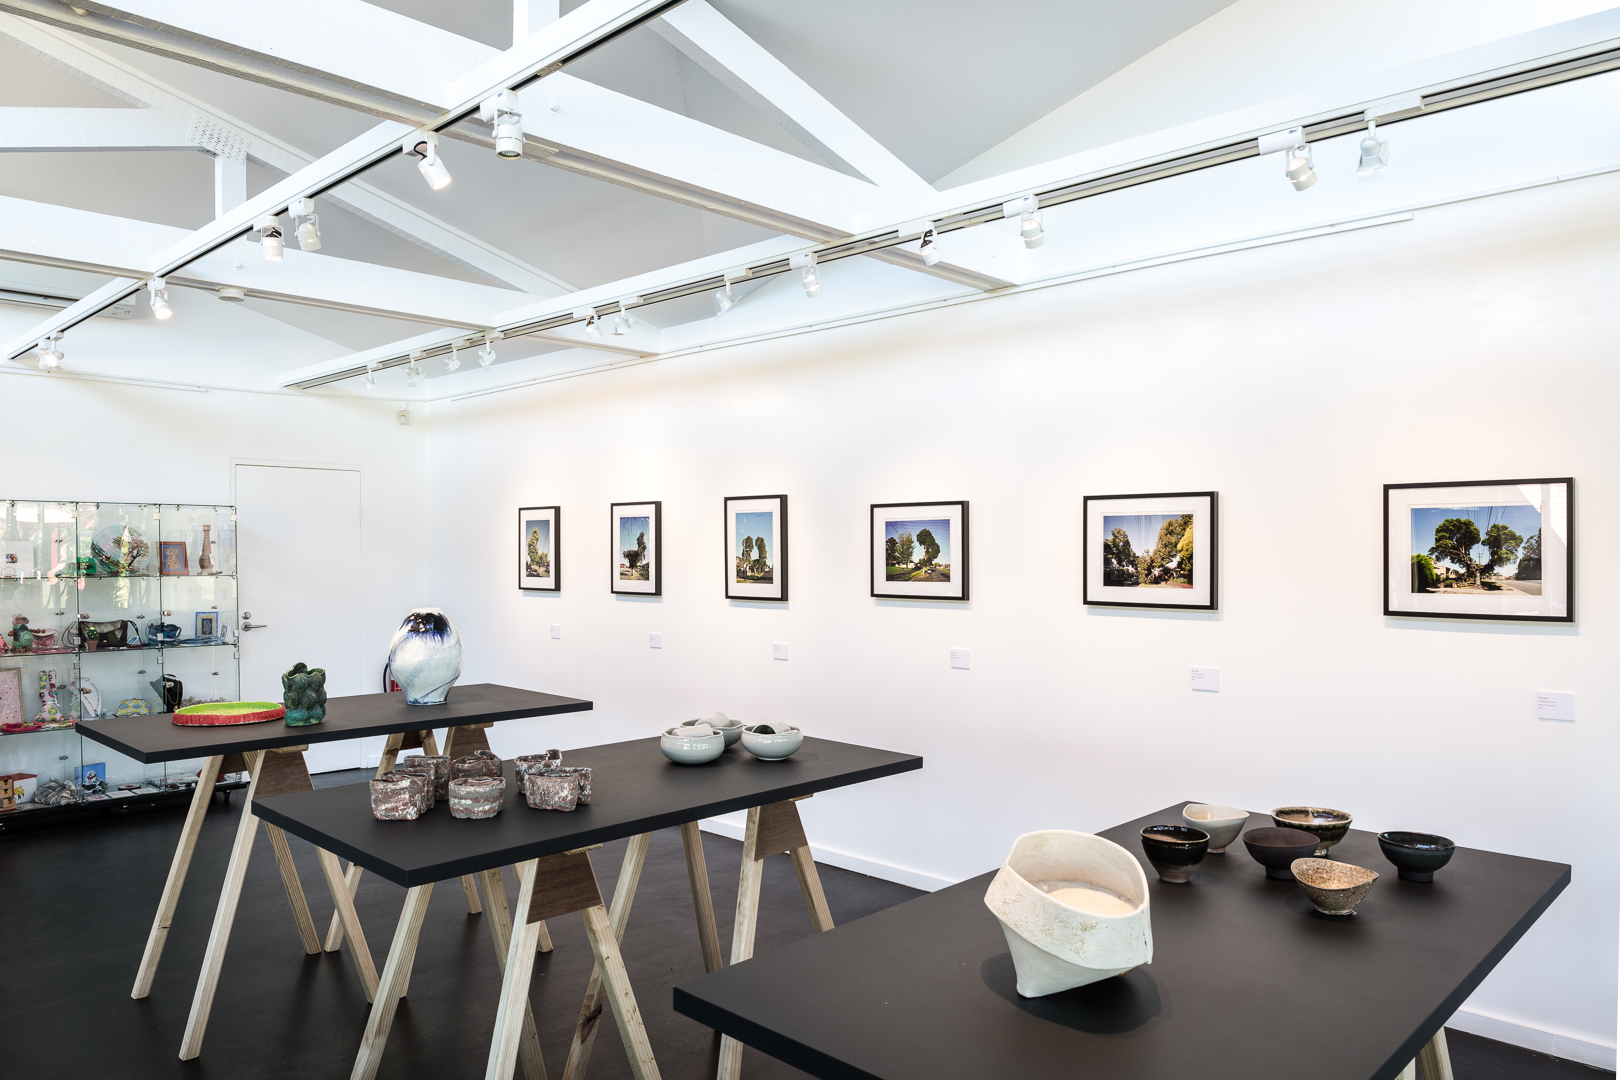   Installation view: 'Objects in Space: Artists in the Garden'. Image courtesy the artists. Photography: Document Photography  